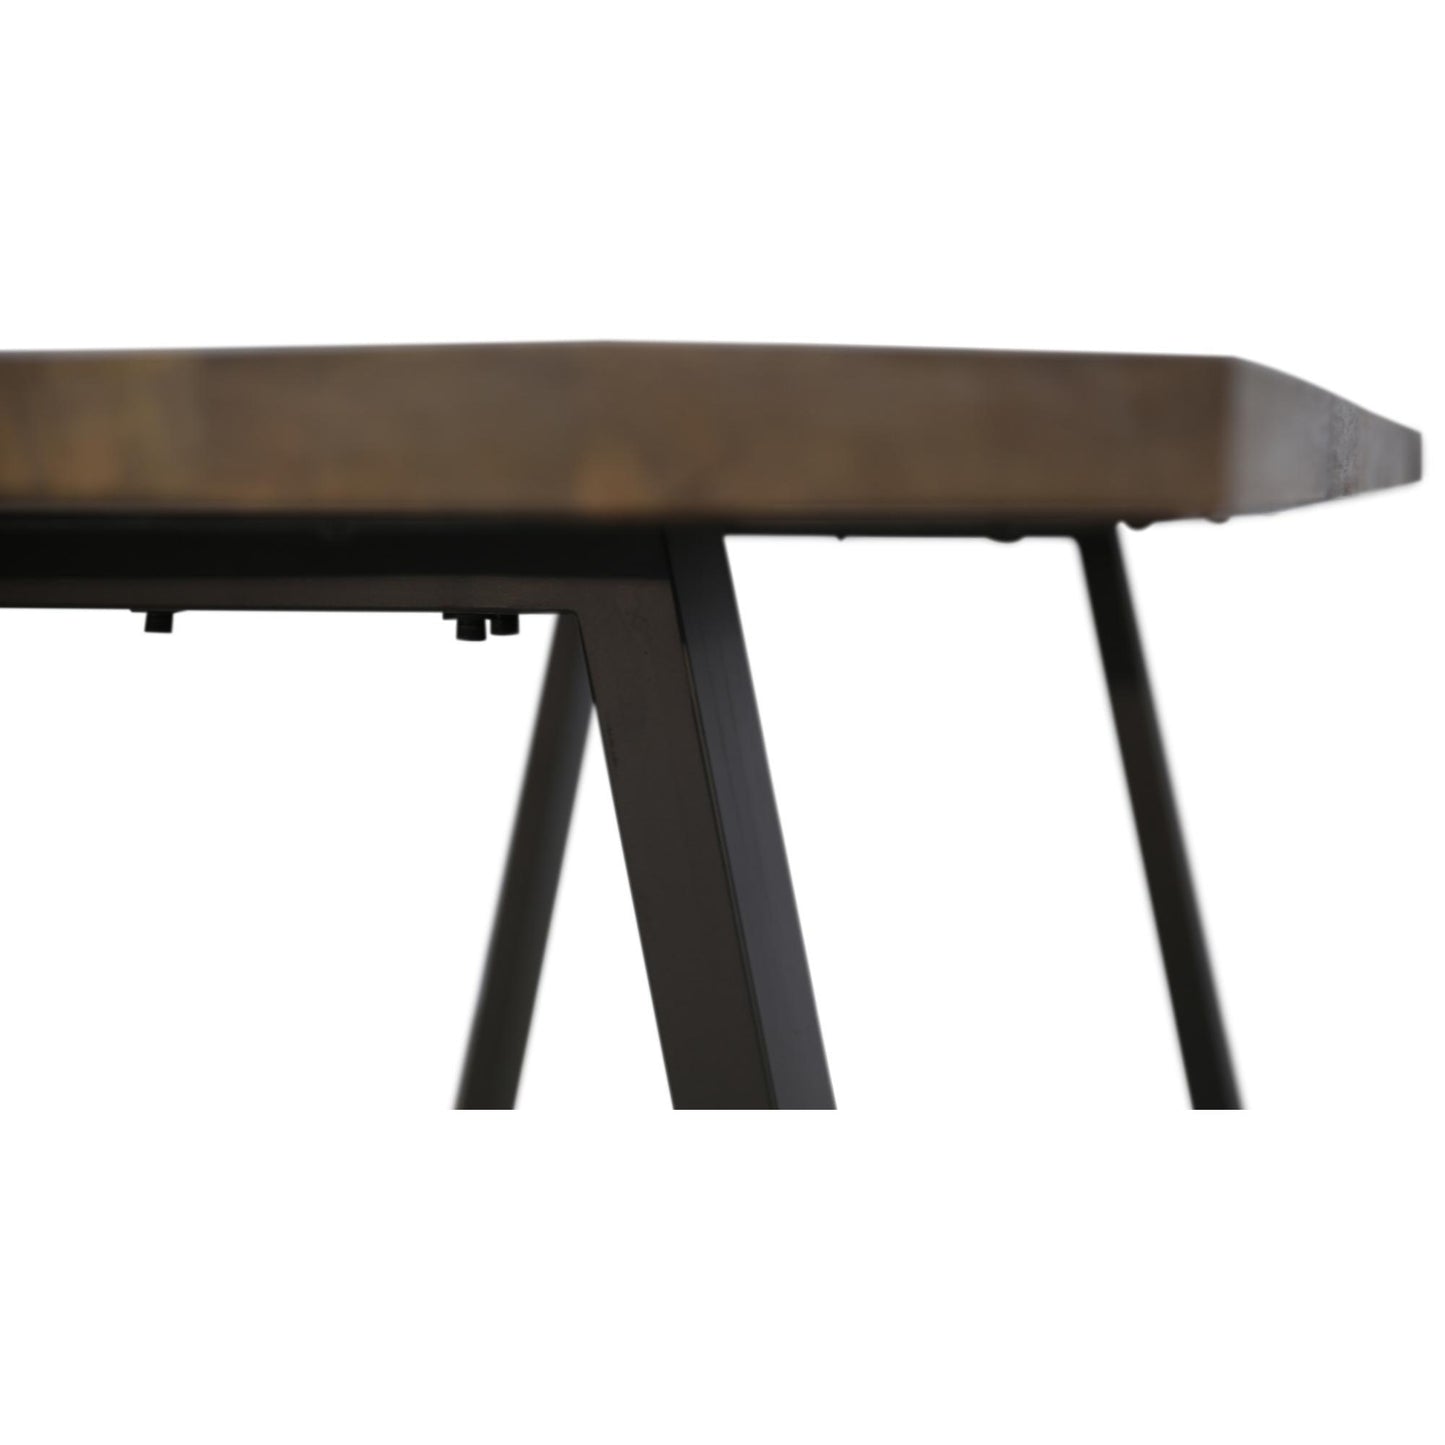 Begonia Dining Table 180cm Live Edge Solid Mango Wood Unique Furniture - Natural